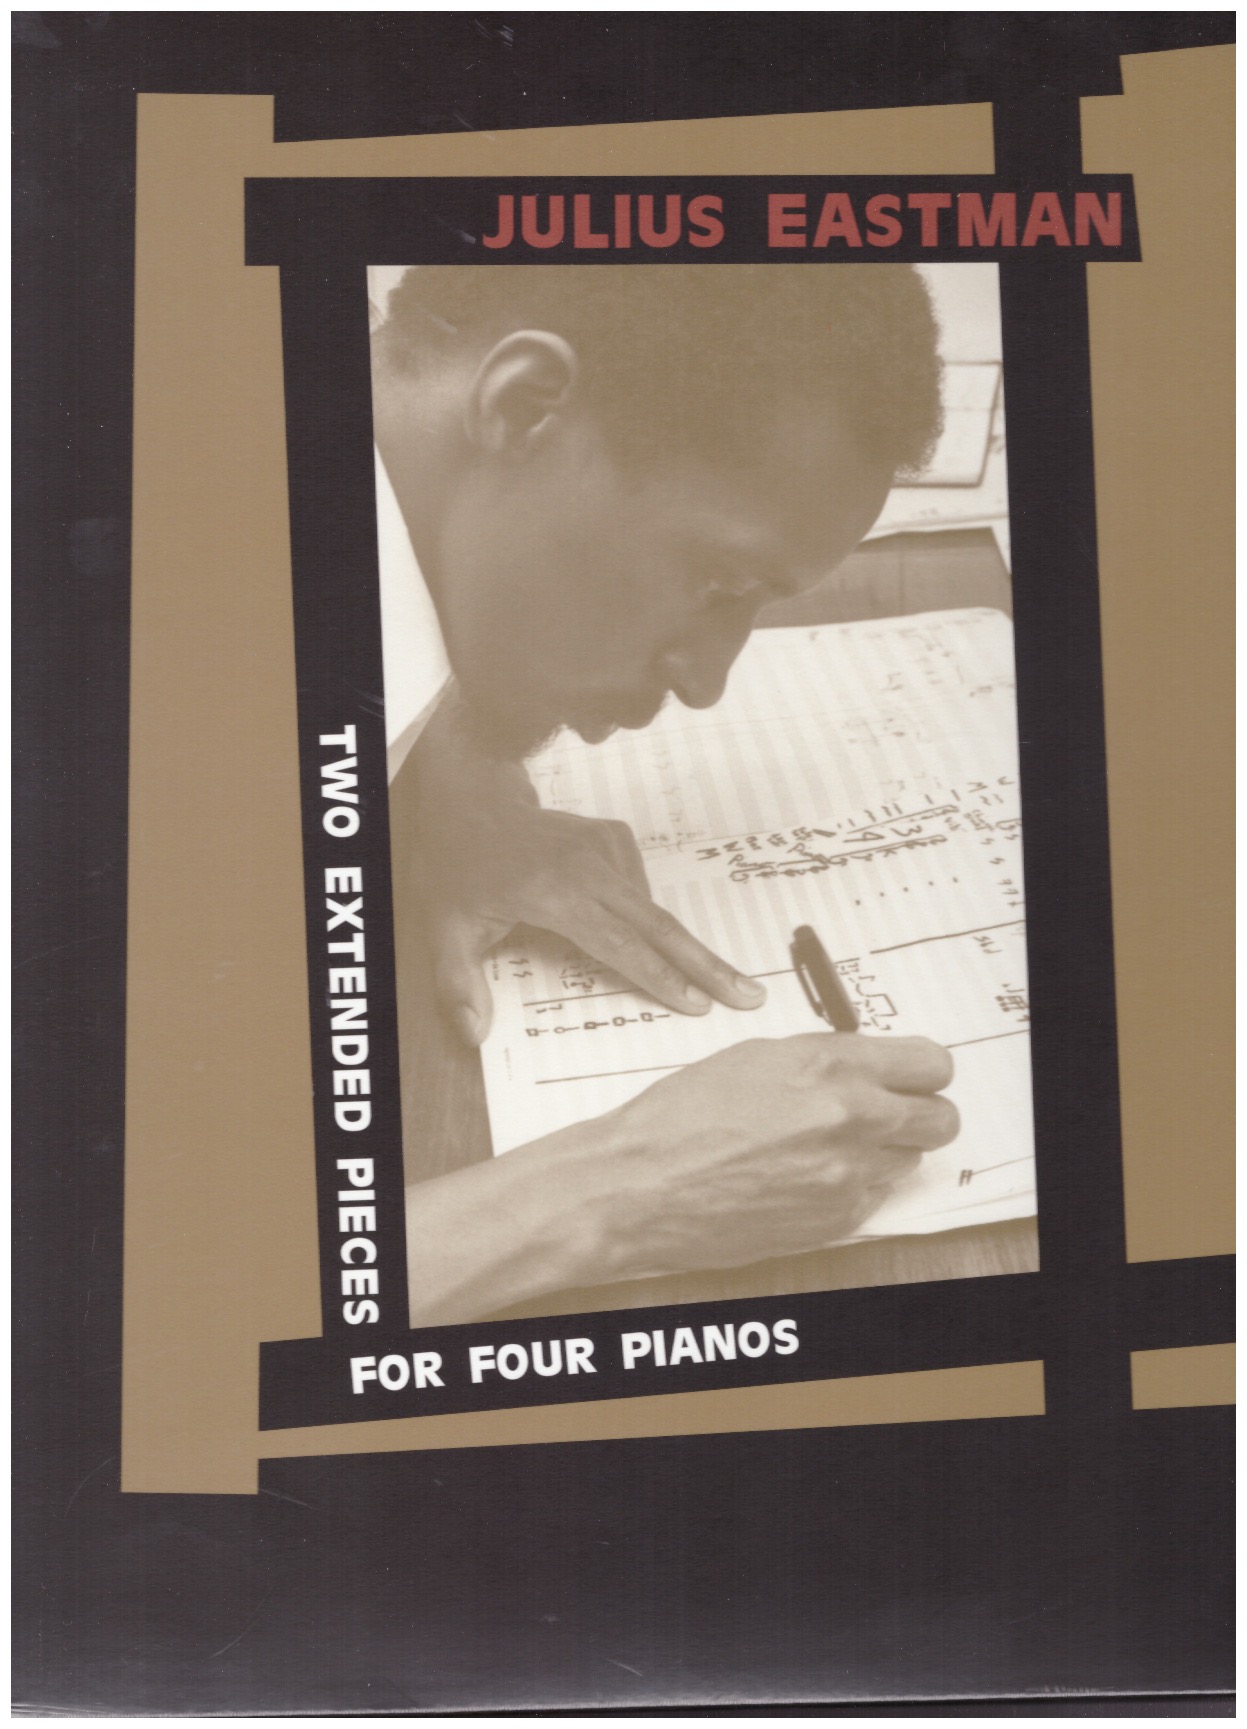 EASTMAN, Julius - Two Extended Pieces for Four Pianos